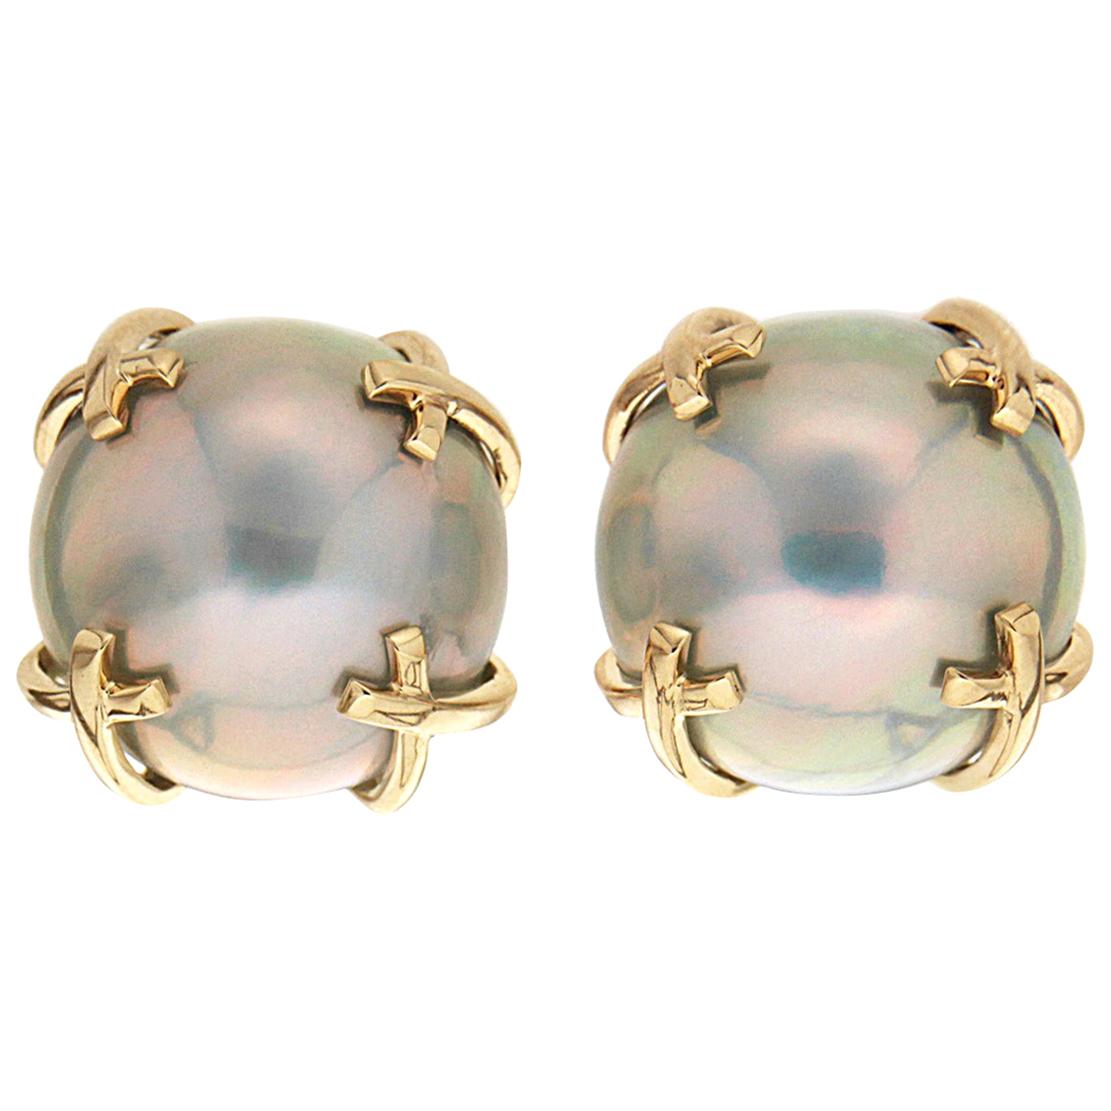 Valentin Magro Mabe Pearl Earrings